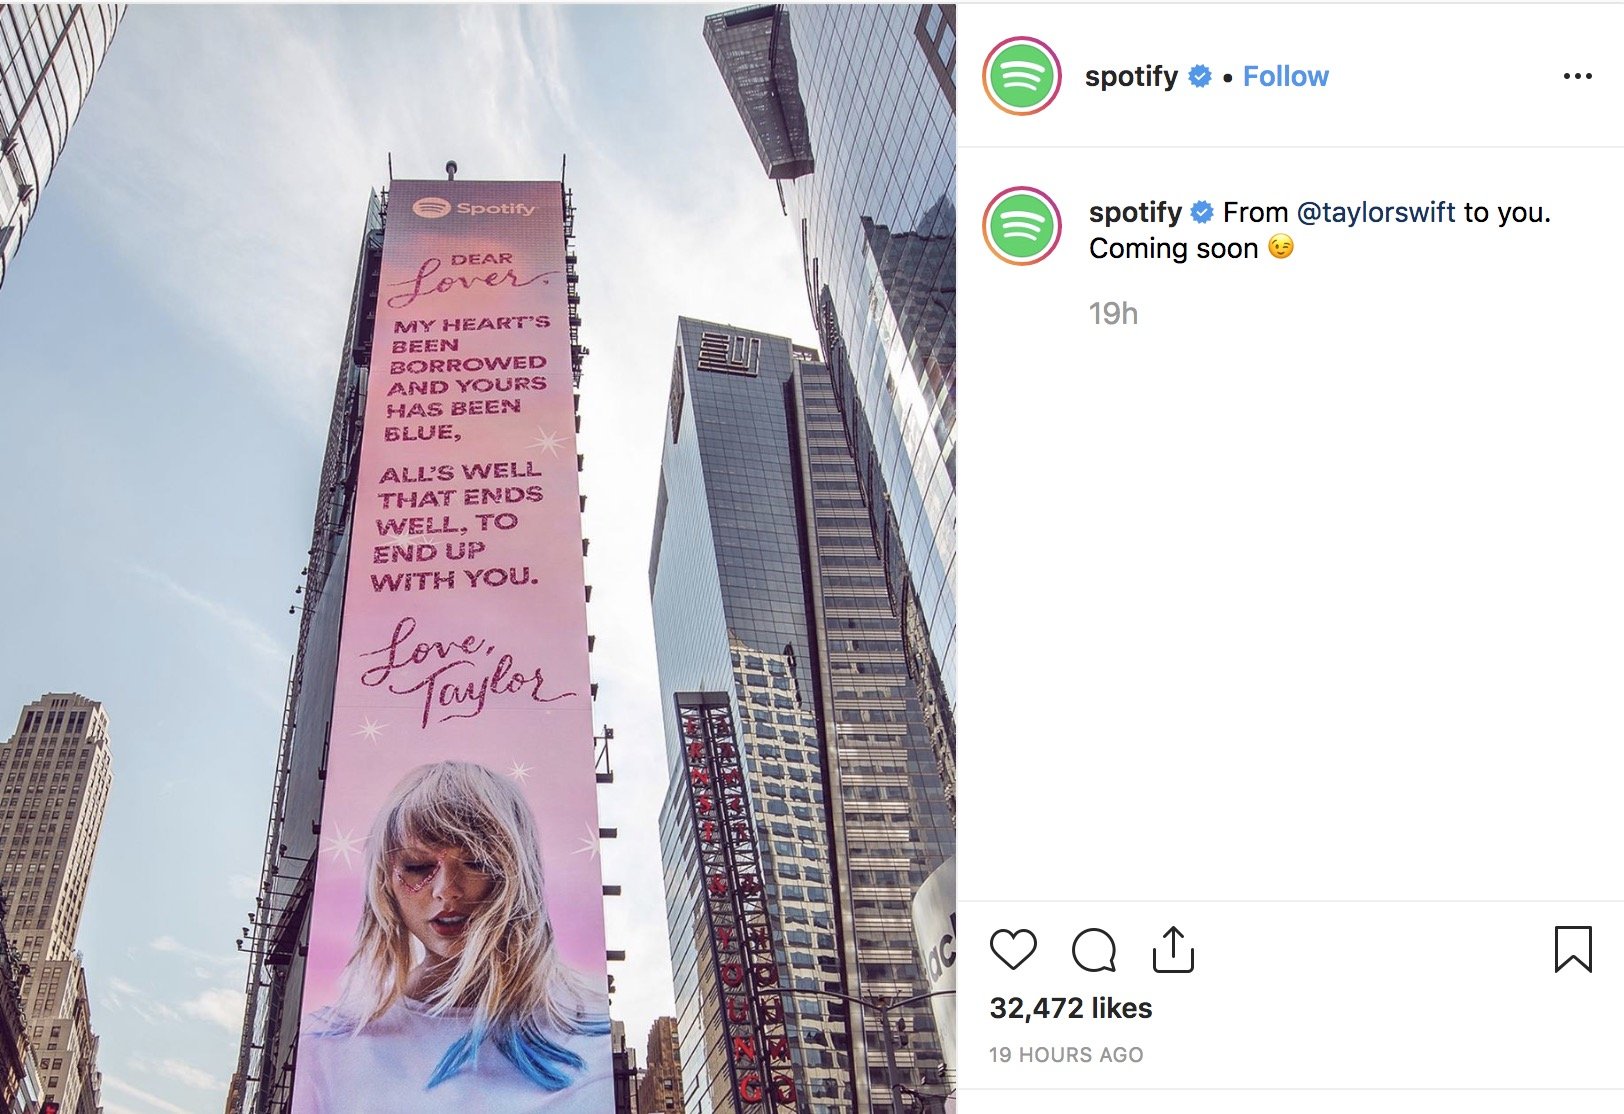 Taylor Swift Is Getting Friendly With Spotify Ahead Of Her New